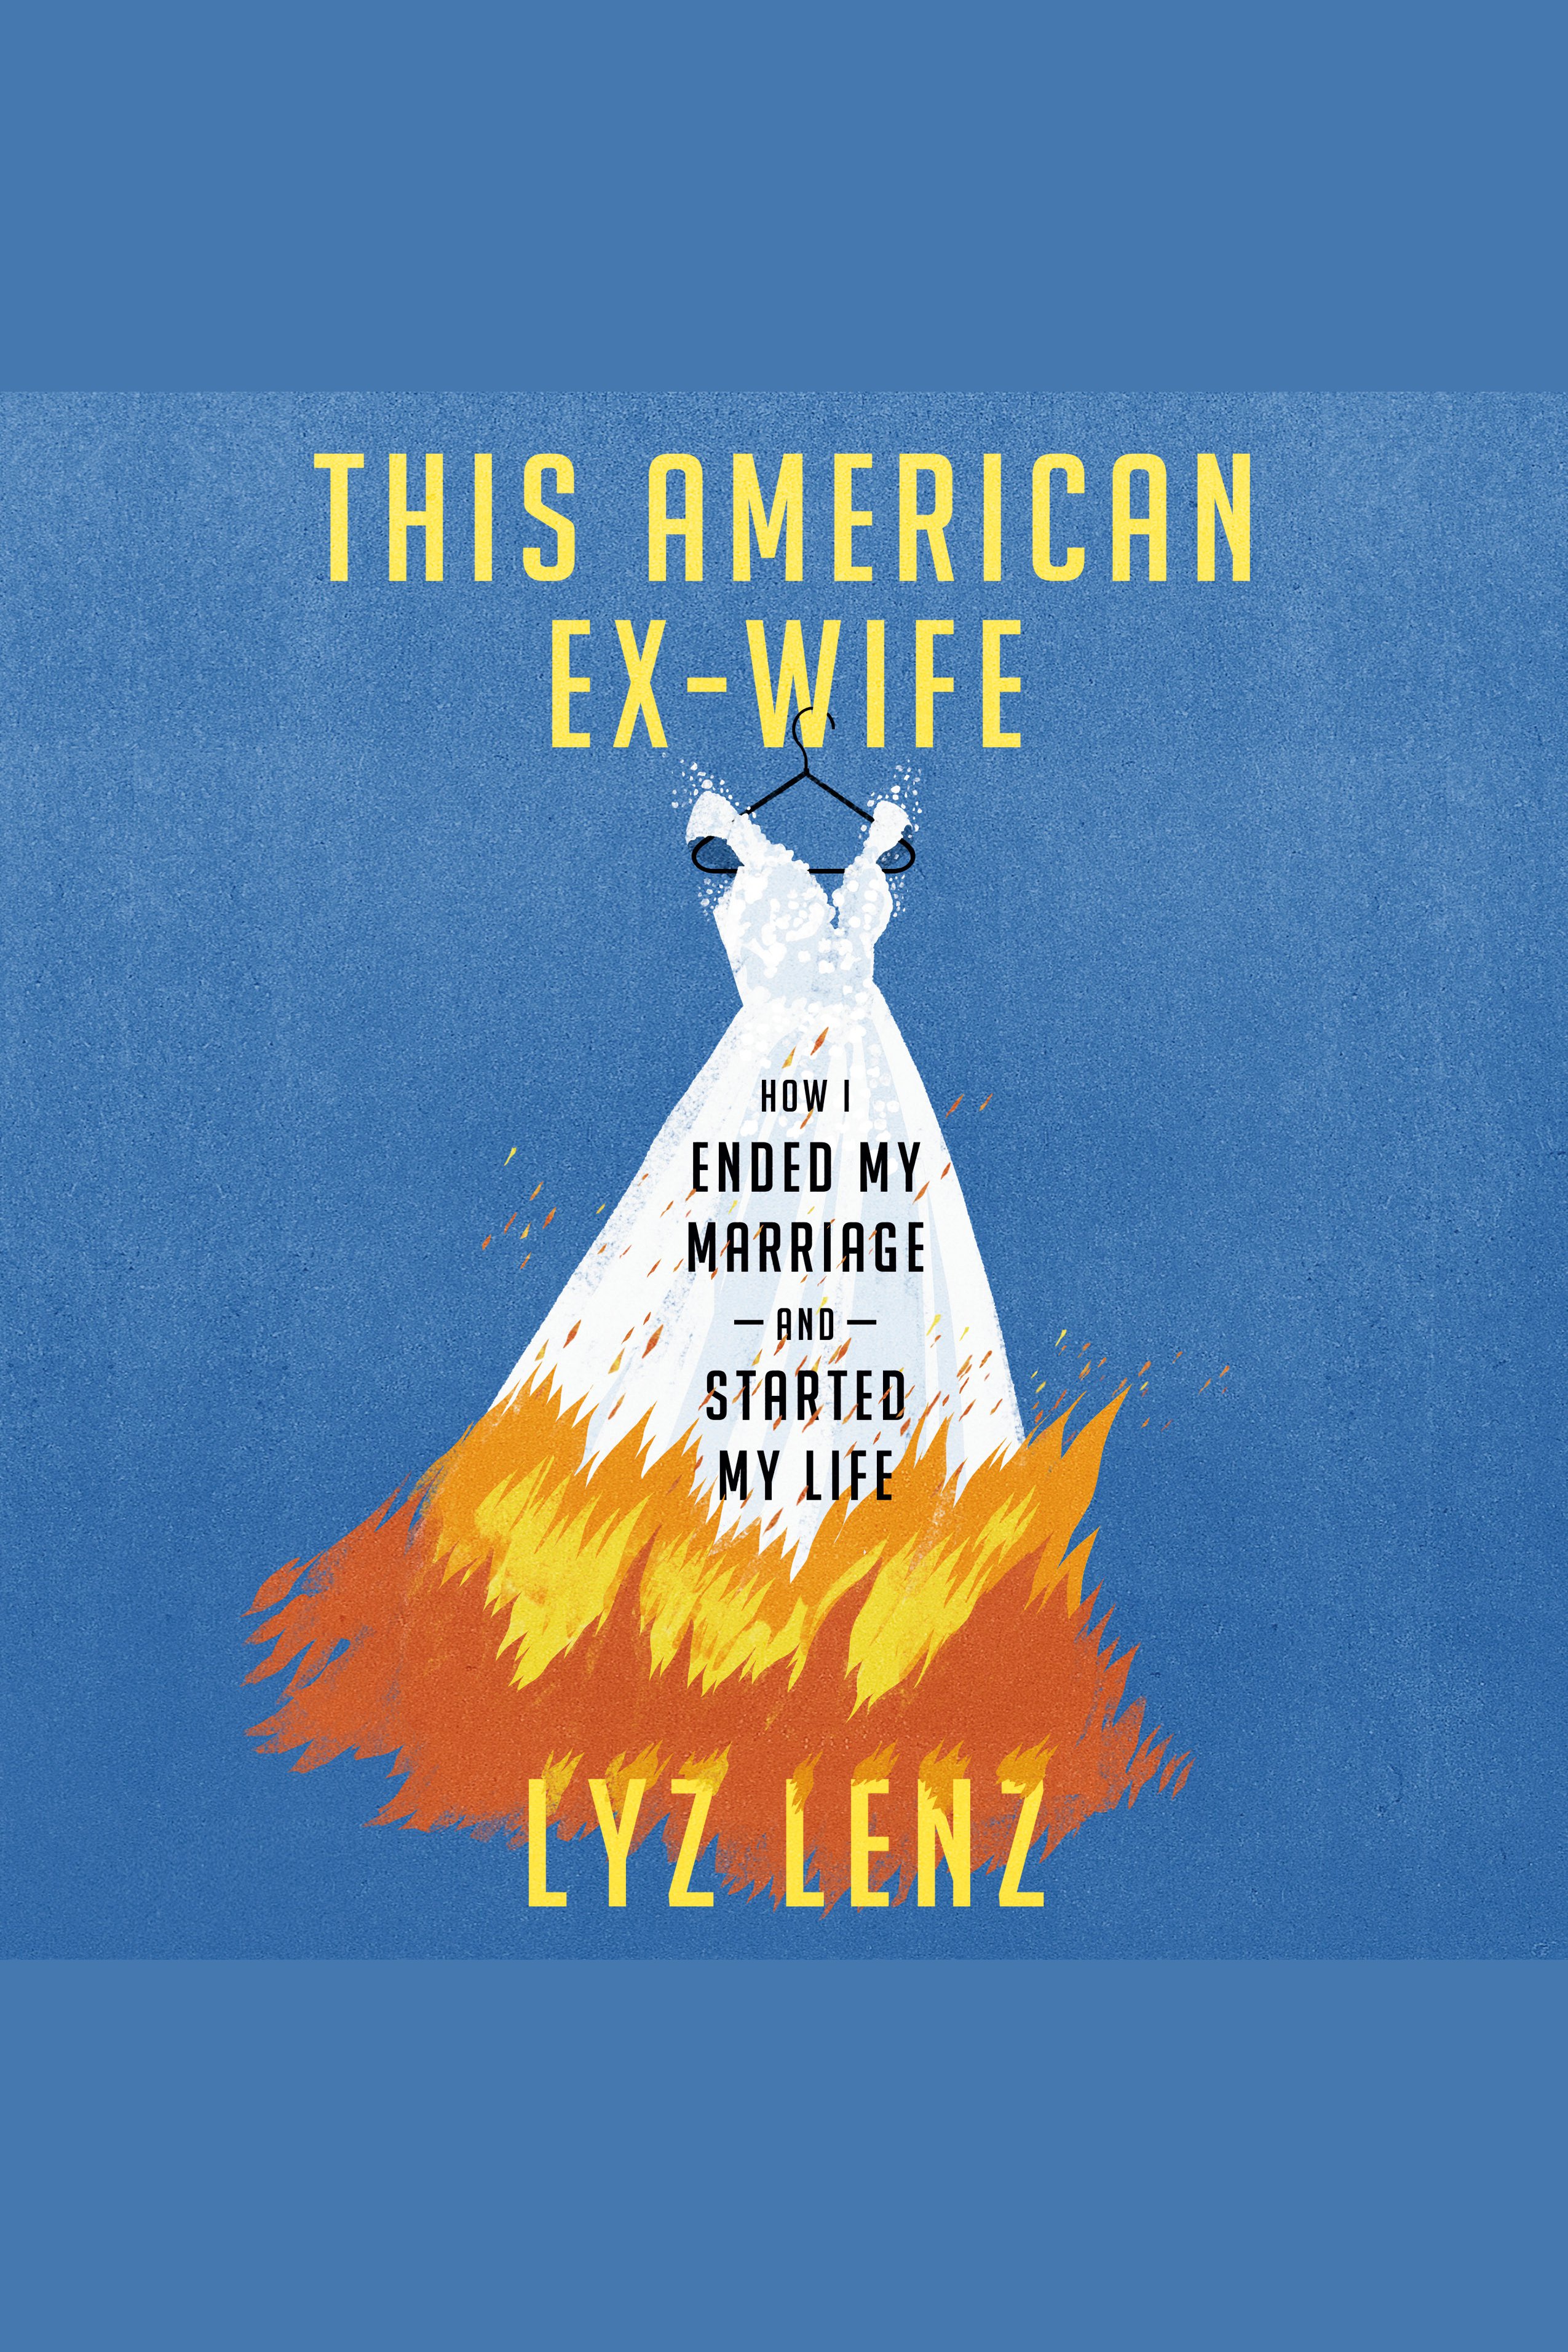 This American Ex-Wife How I Ended My Marriage and Started My Life cover image